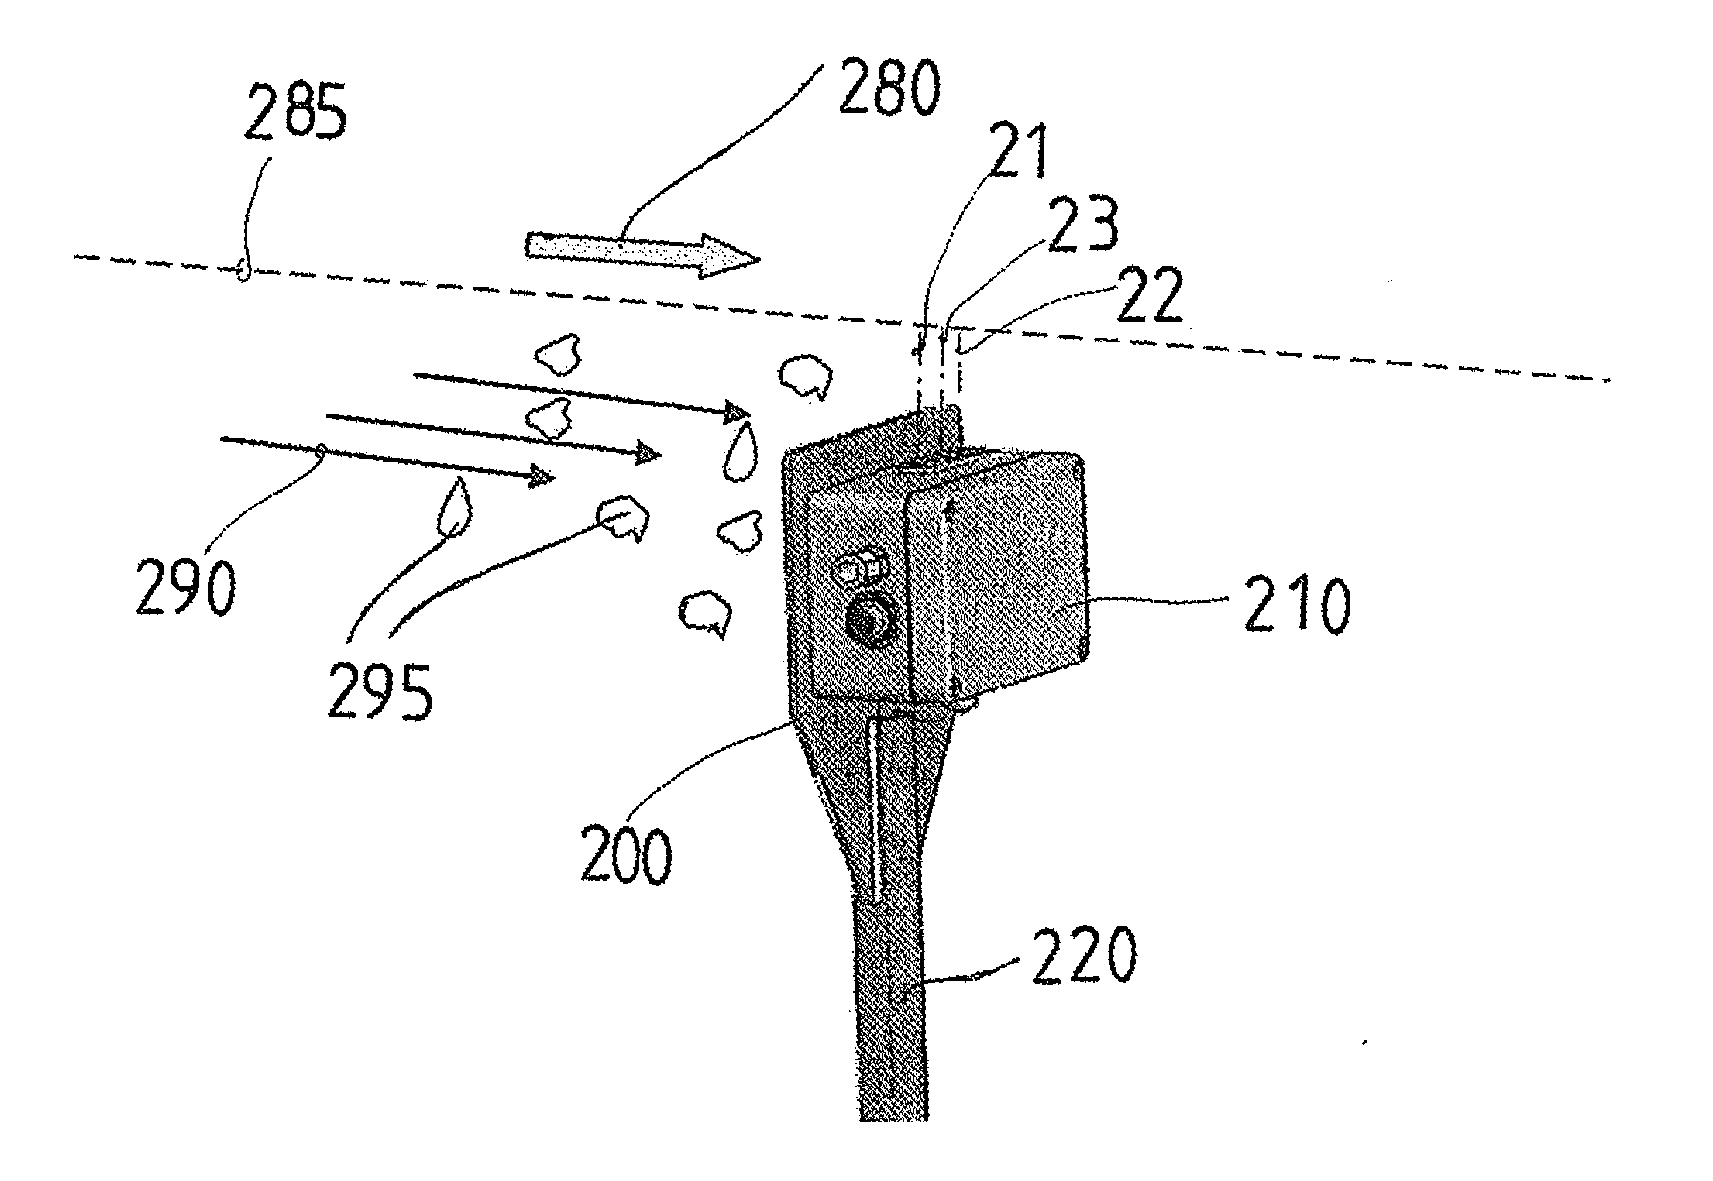 Device for determining the water content of a target